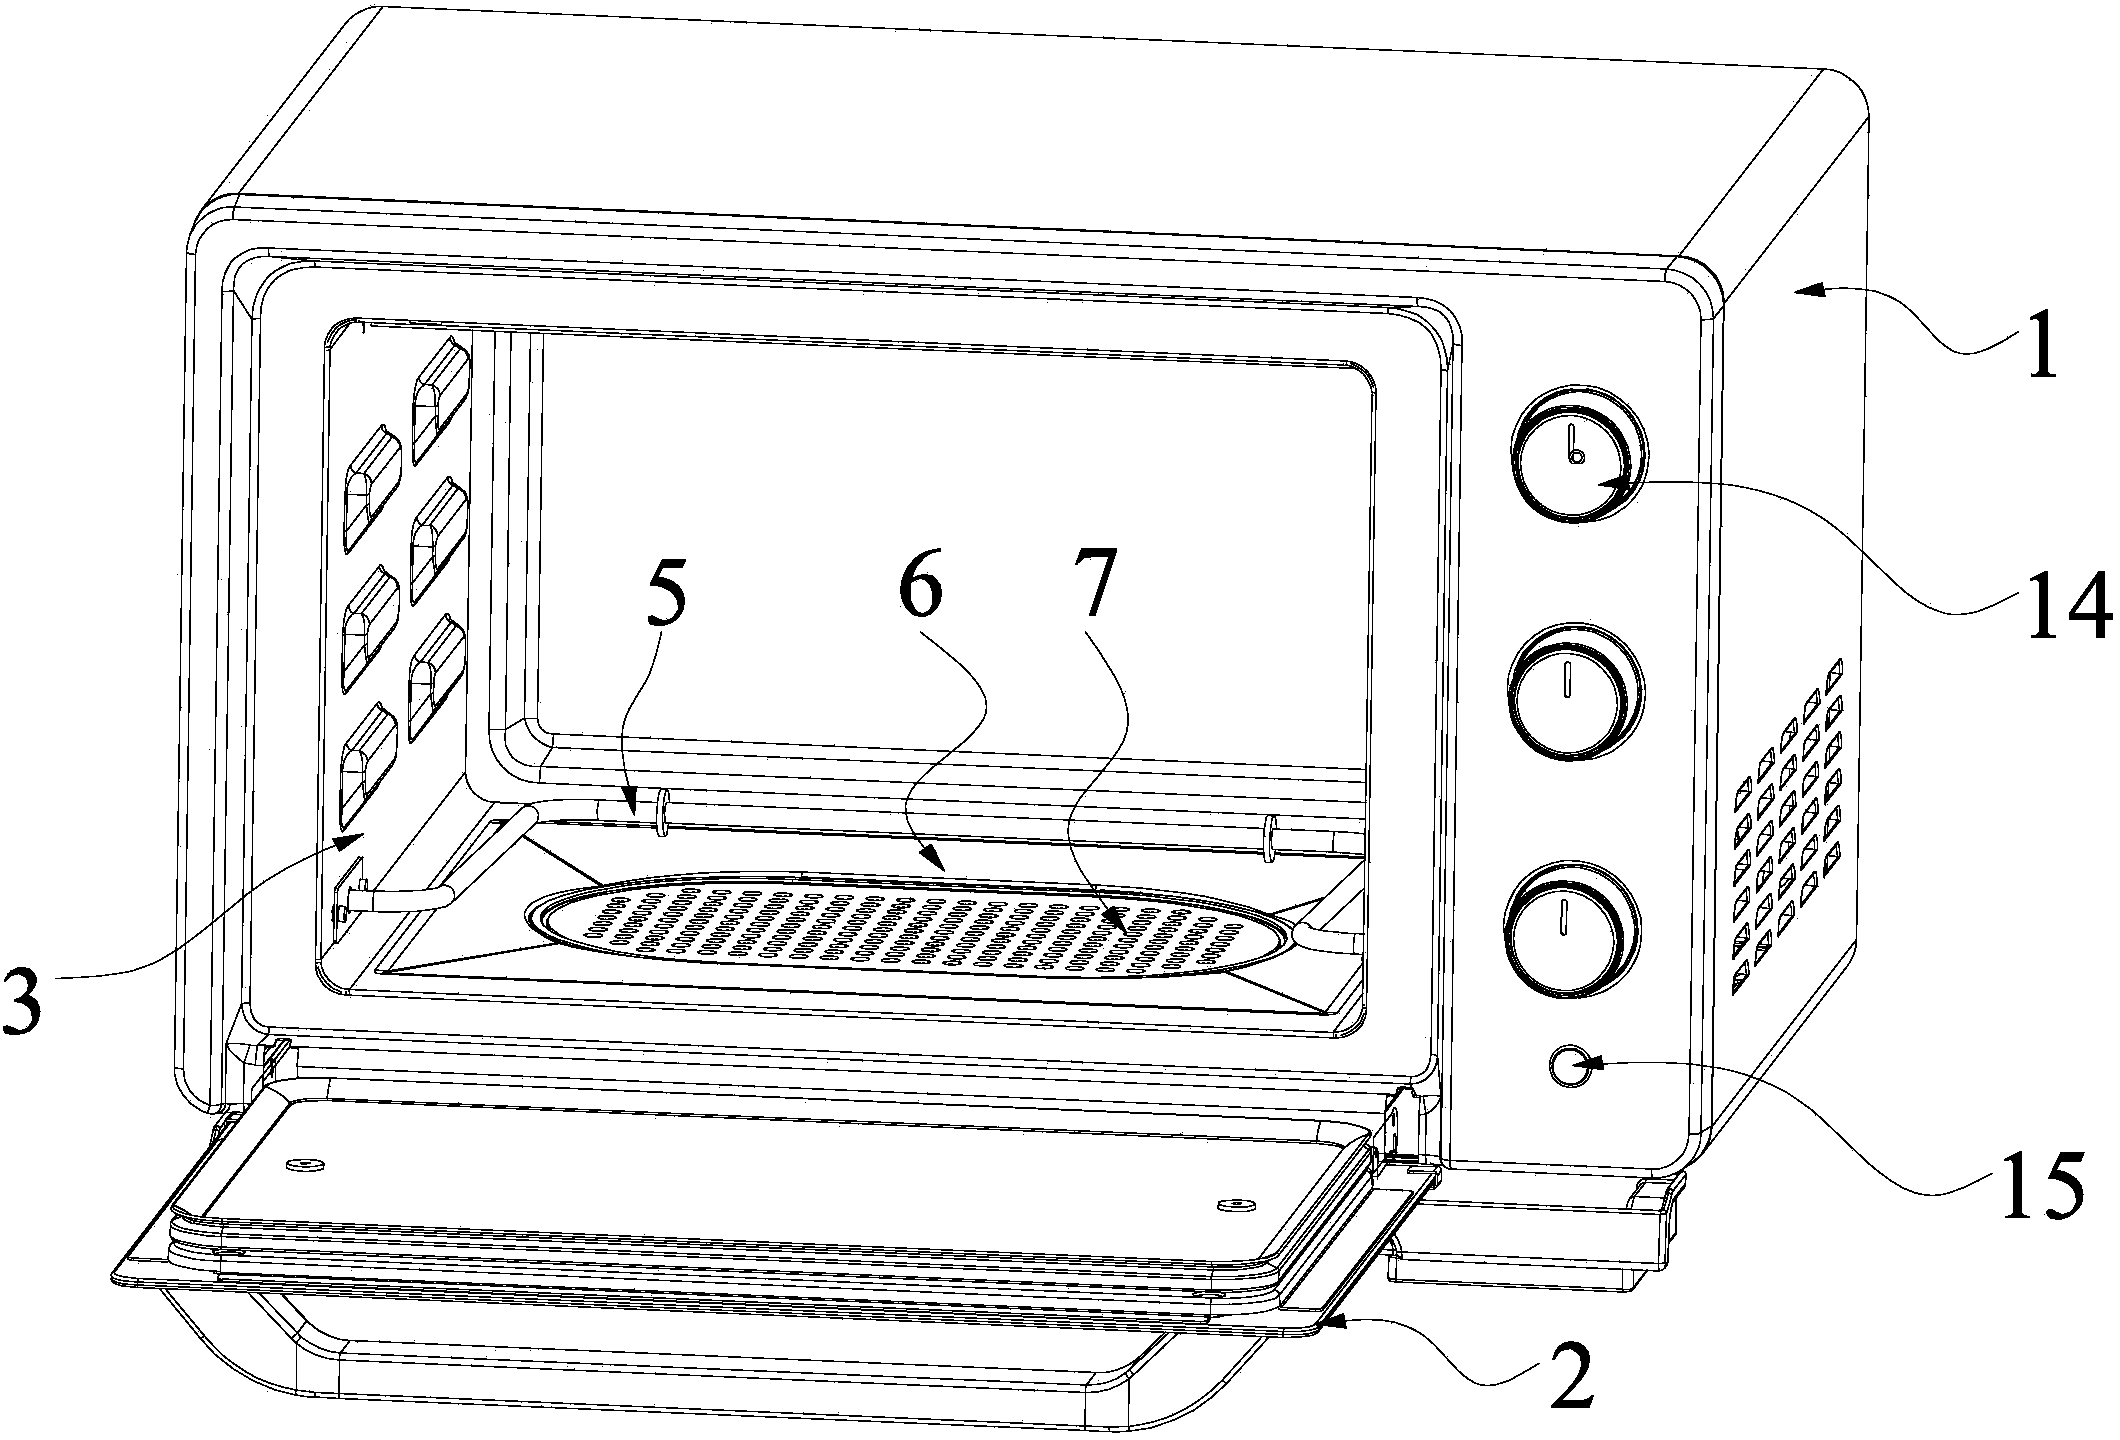 Steaming oven without water tank